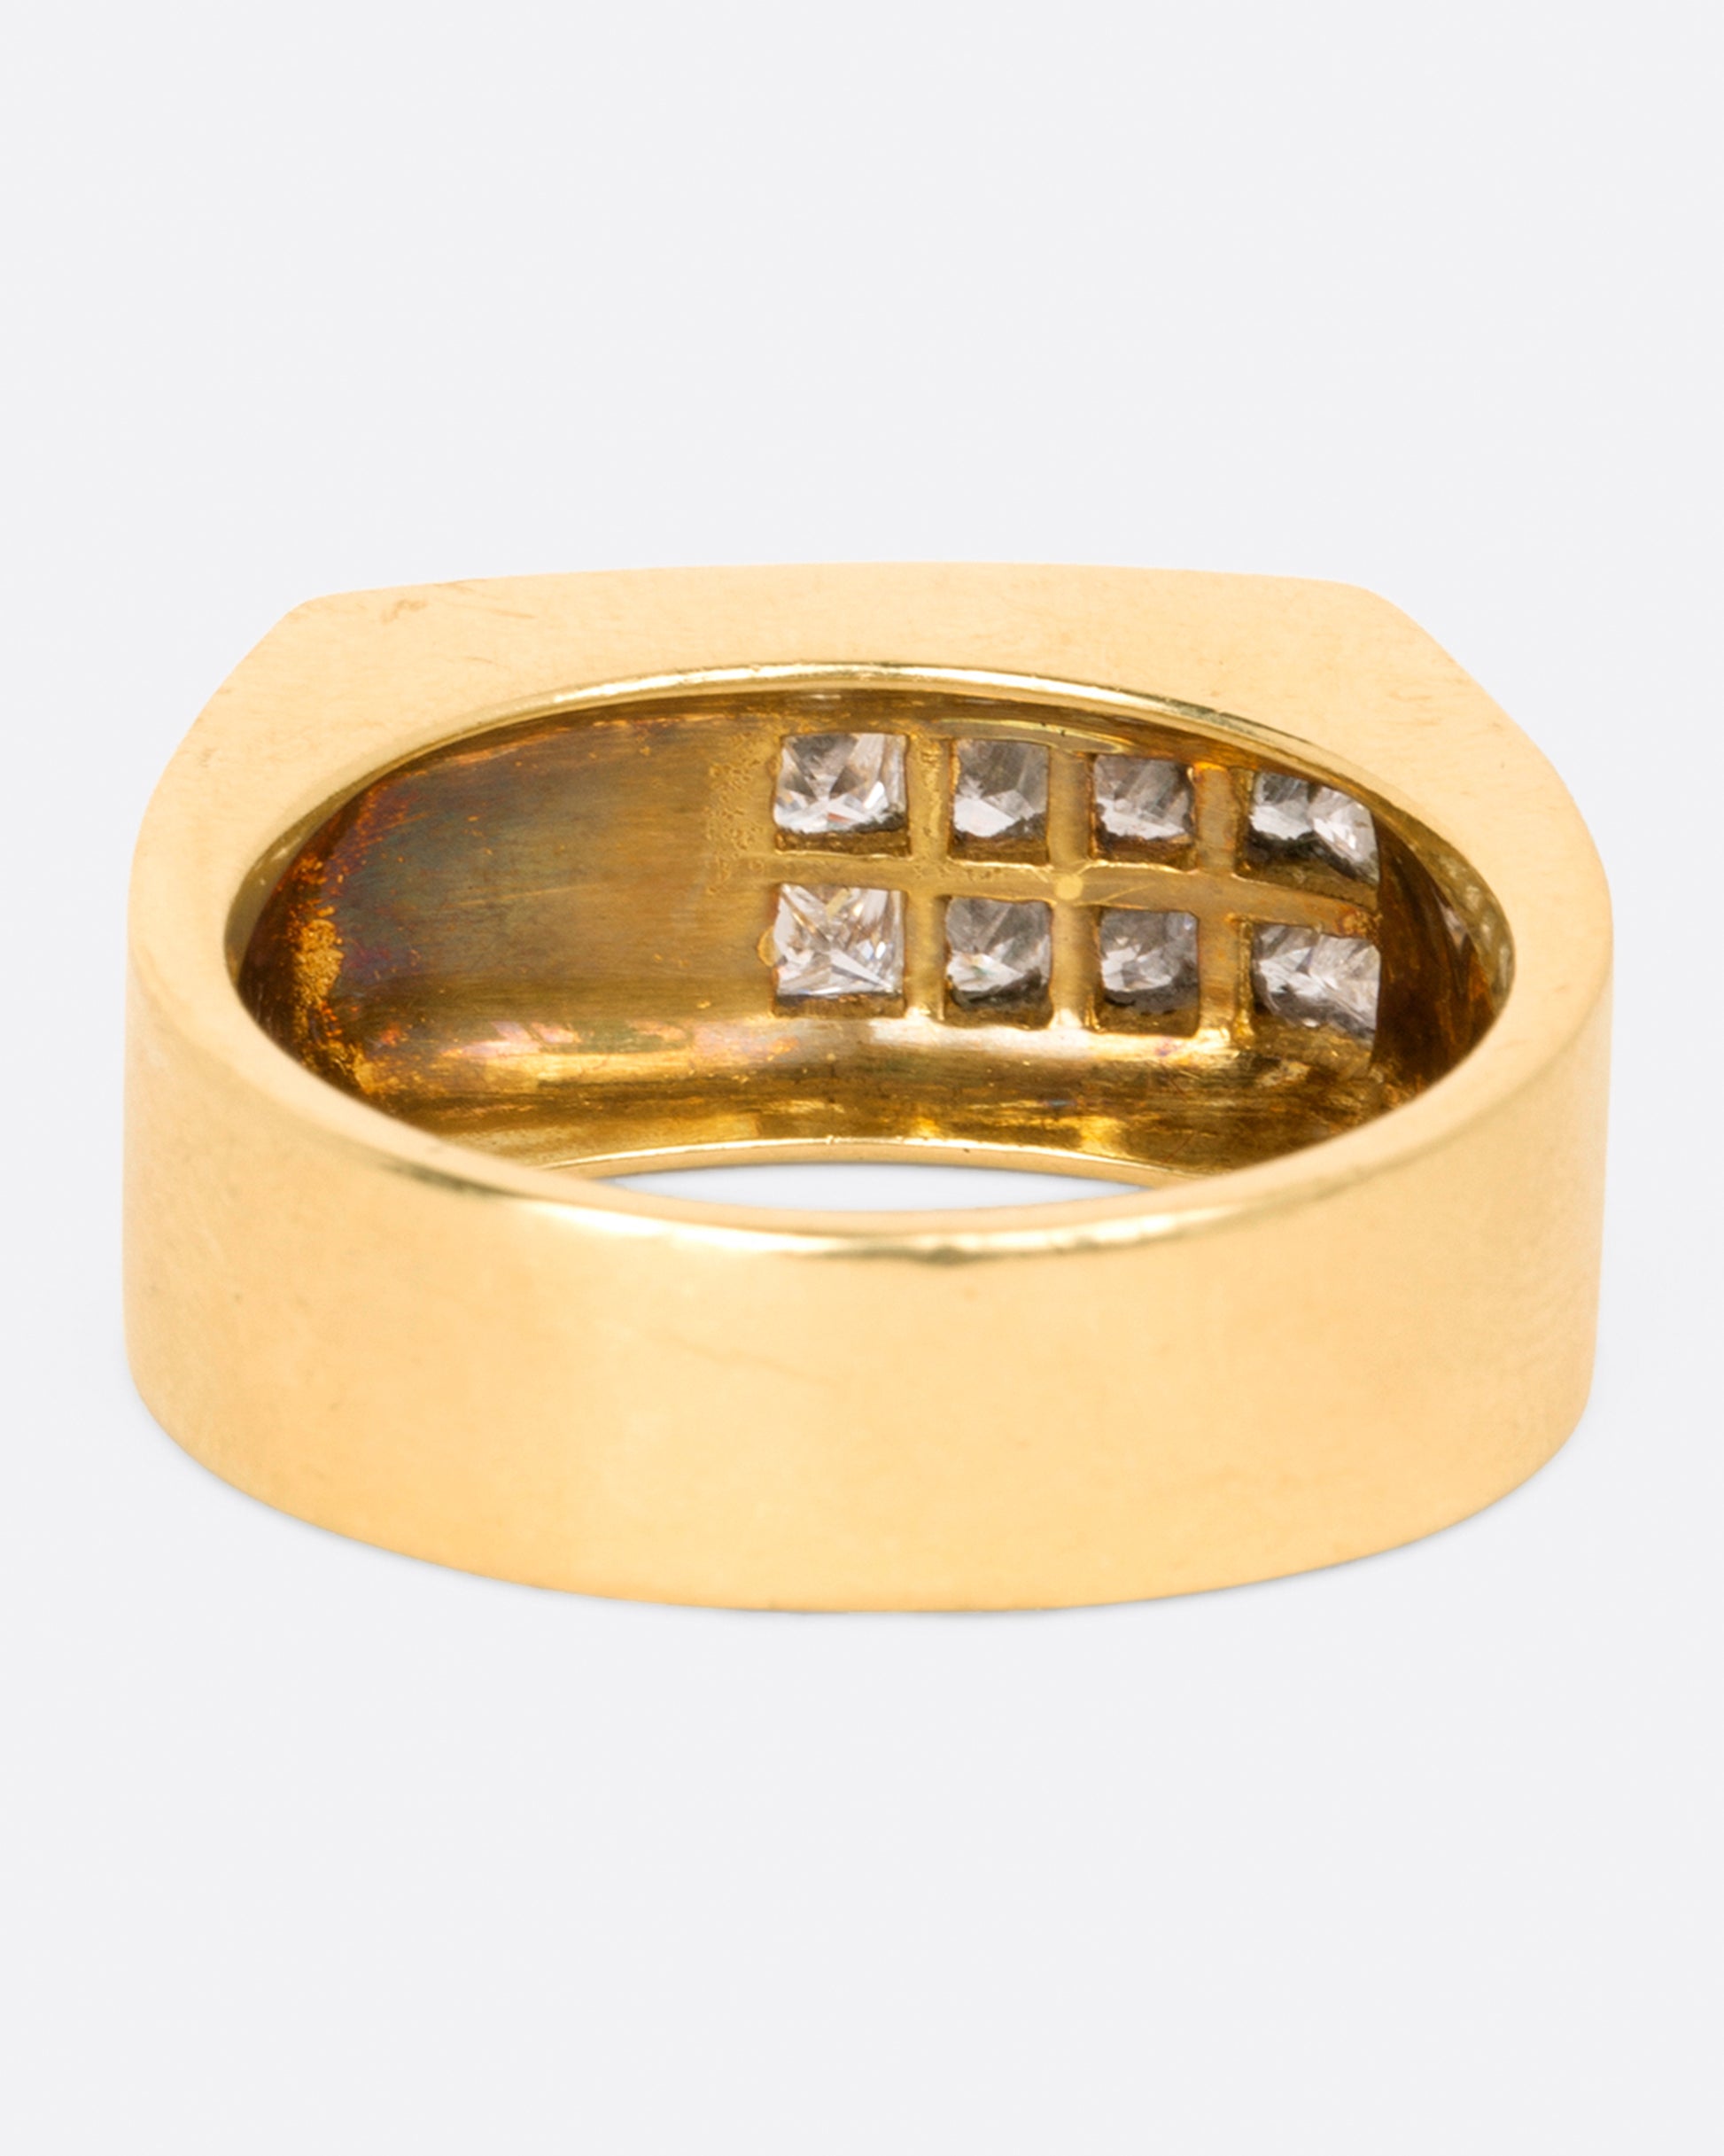 A yellow gold rectangular signet ring with 10 princess cut diamonds on one corner, shown from the back.